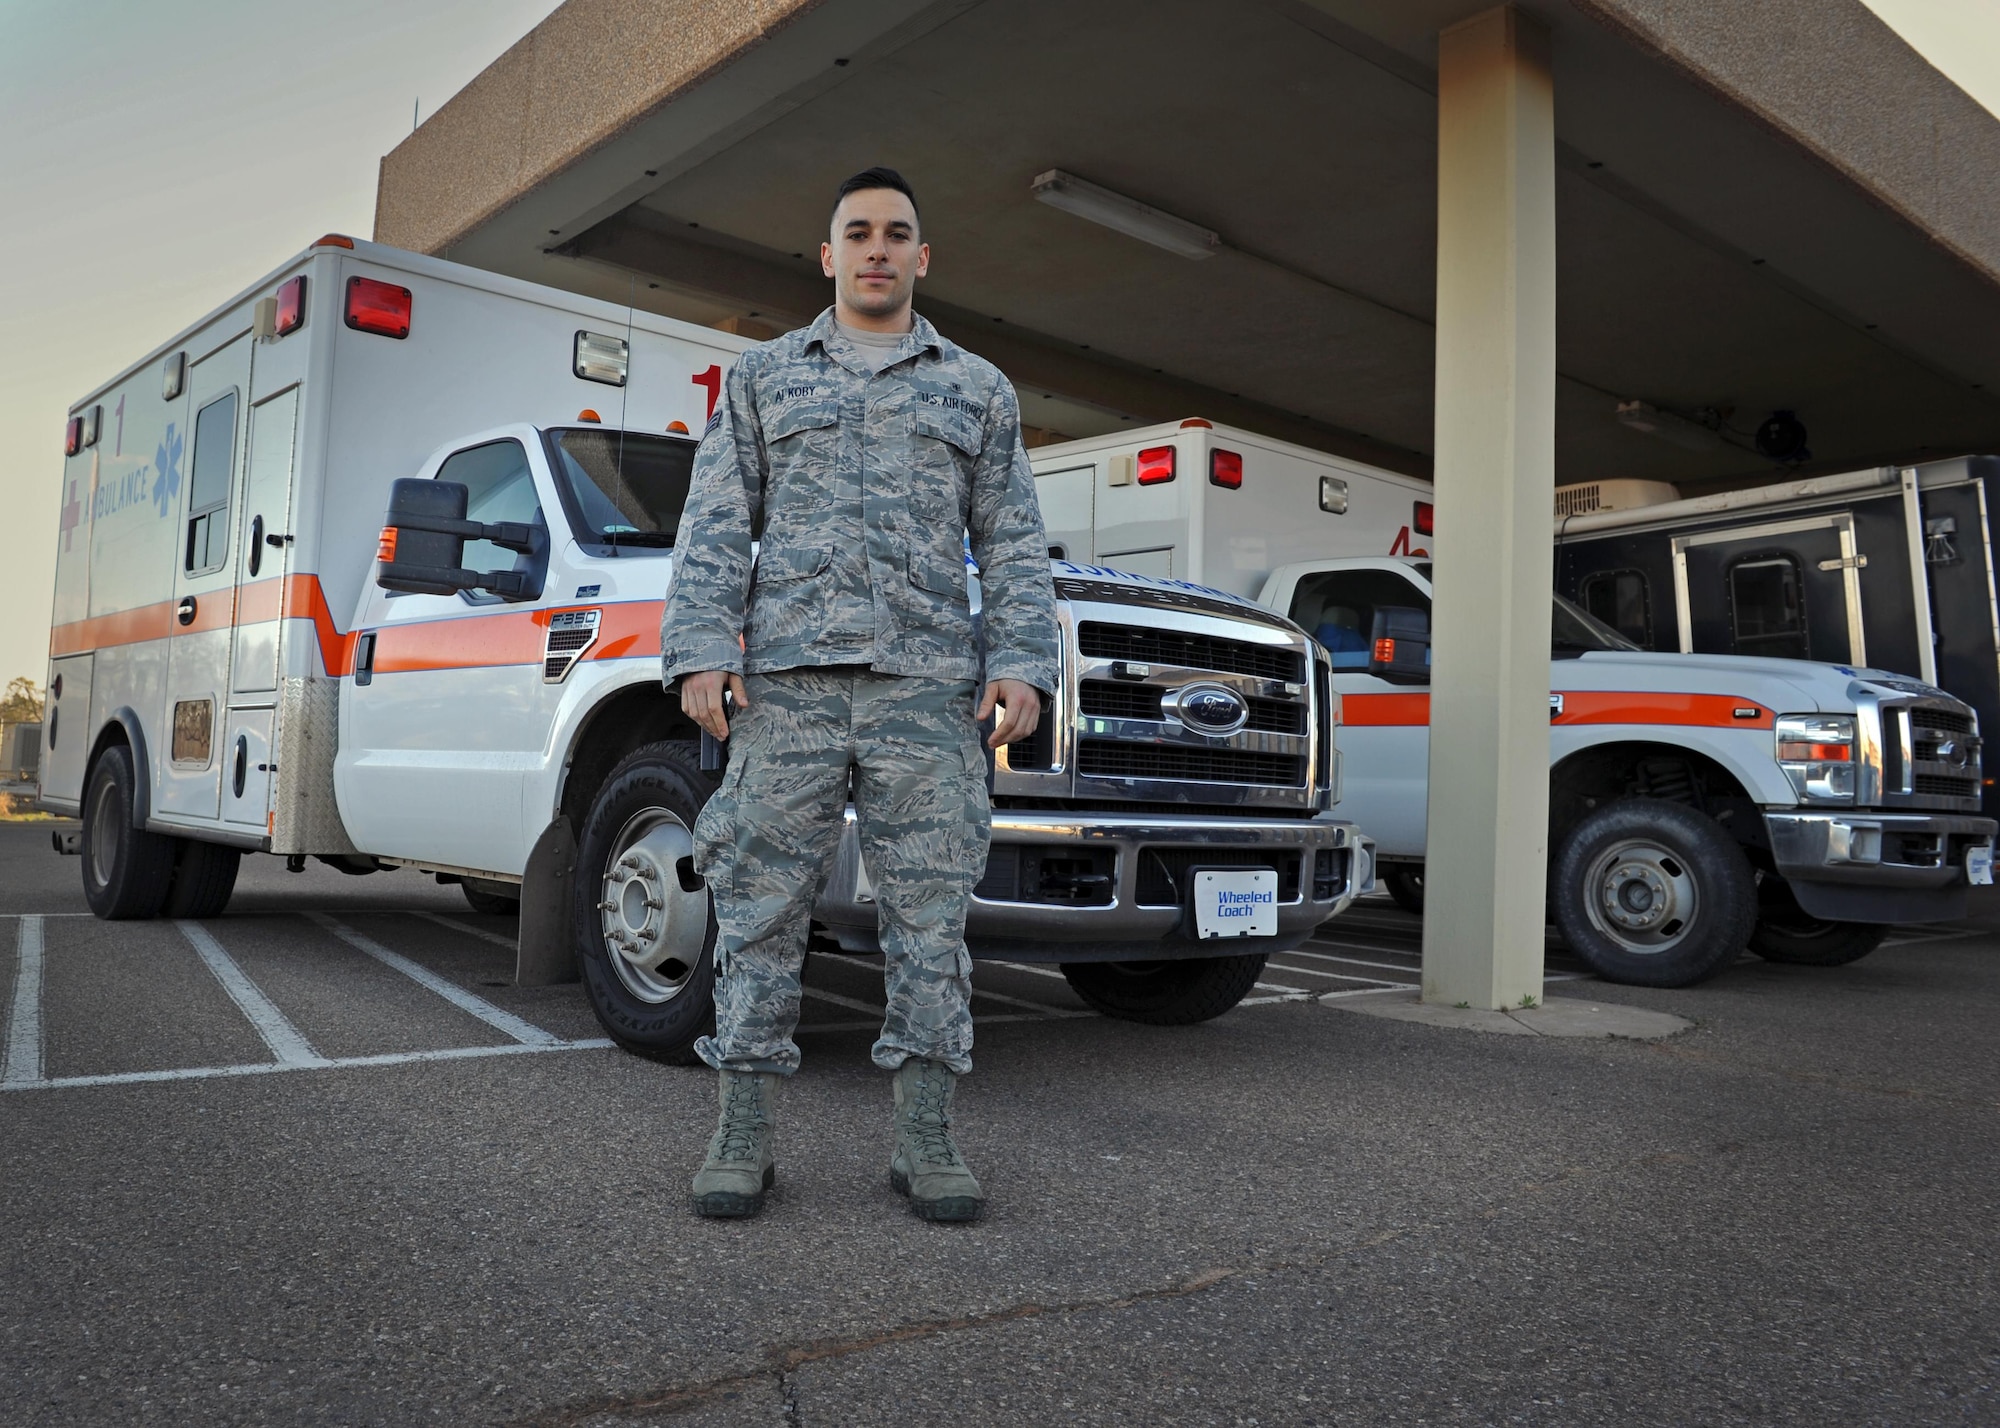 Senior Airman Paul Alkoby, 27th Special Operations Medical Operations Squadron aerospace medical technician, stands just outside the clinic March 2, 2016, at Cannon Air Force Base, N.M. Alkoby has come to the aid of those in need both on and off duty time and time again, solidifying his status as a trusted care hero amongst Air Force medical professionals; he credits his upbringing and the Air Force’s integrity-first mindset for his inability to standby while others are in need. (U.S. Air Force photo/Staff Sgt. Whitney Amstutz)